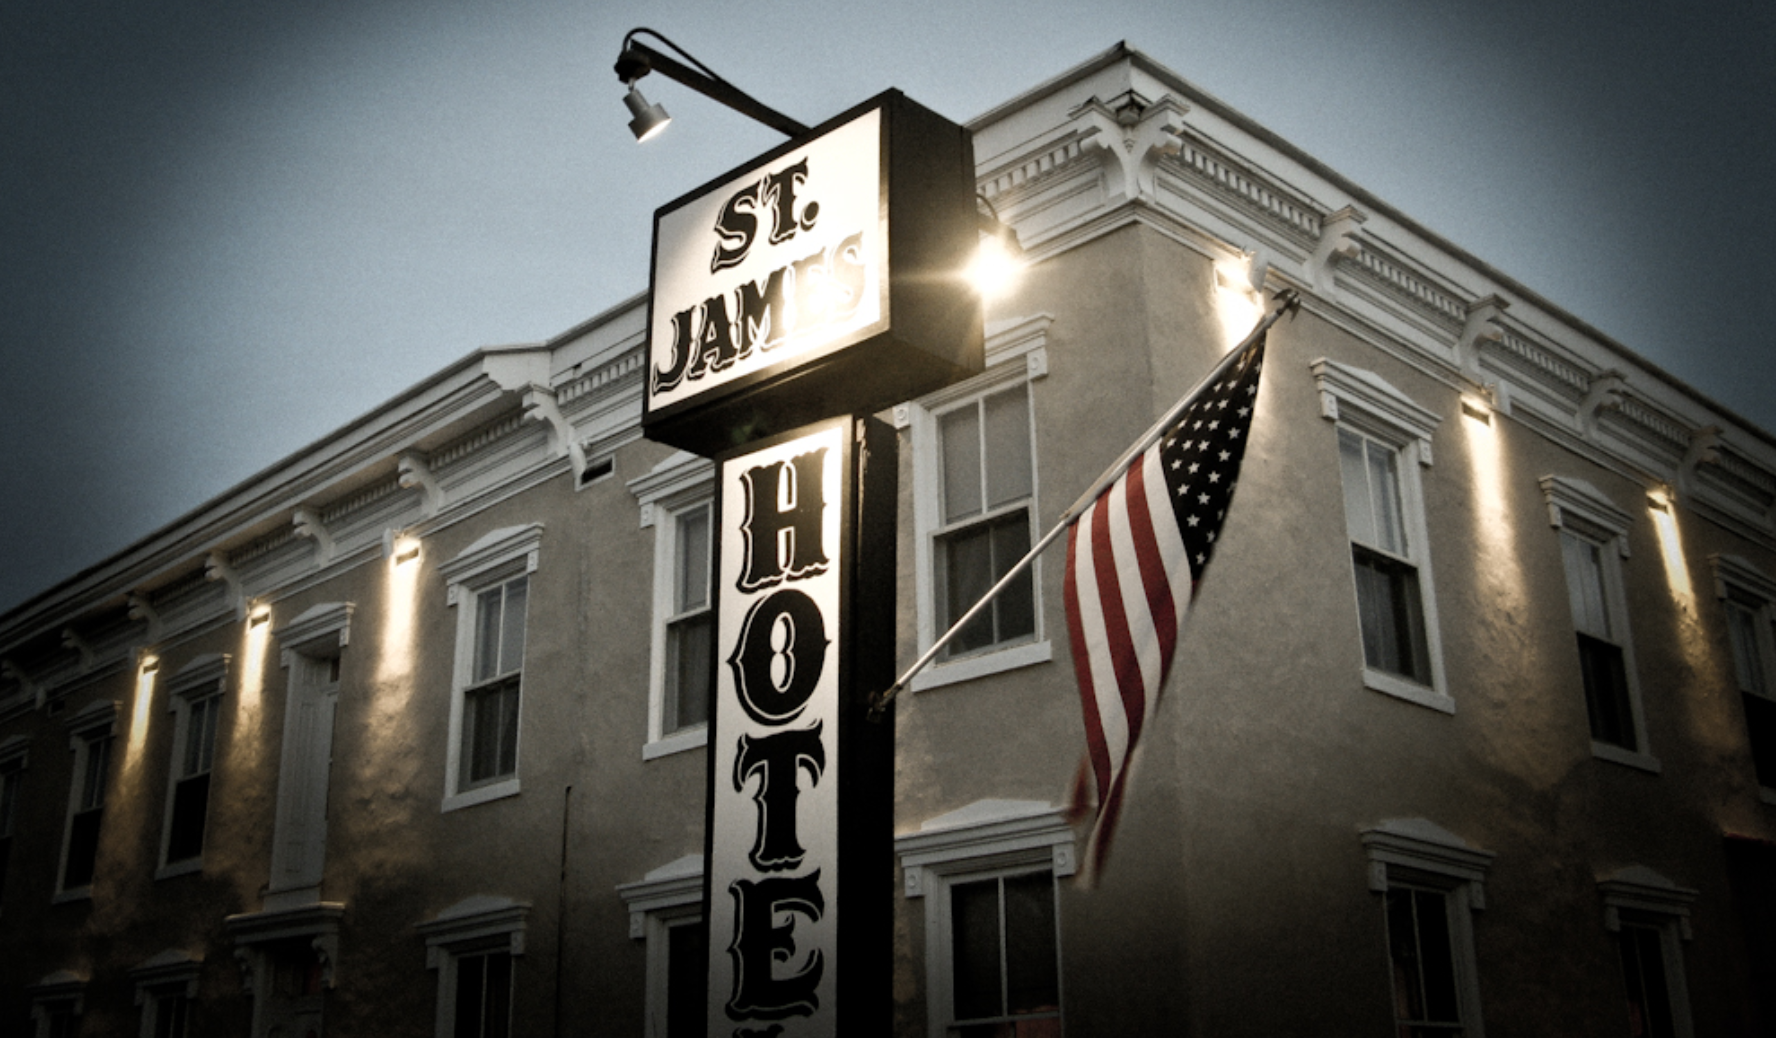 The St James Hotel In Cimarron New Mexico Is Haunted